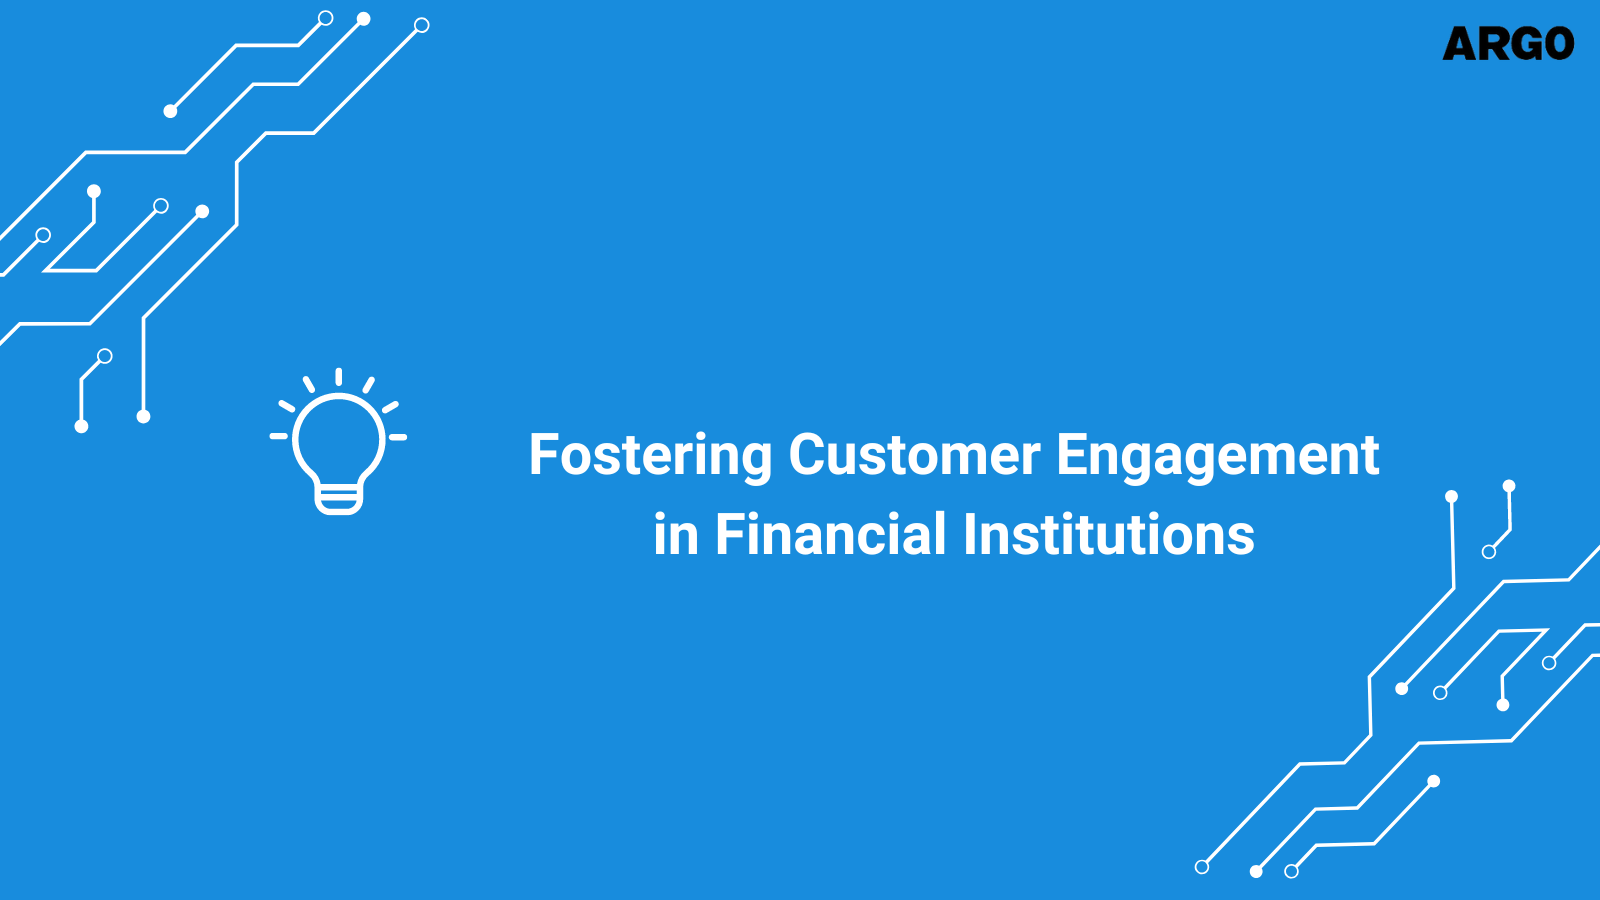 Fostering Customer Engagement in Financial Institutions